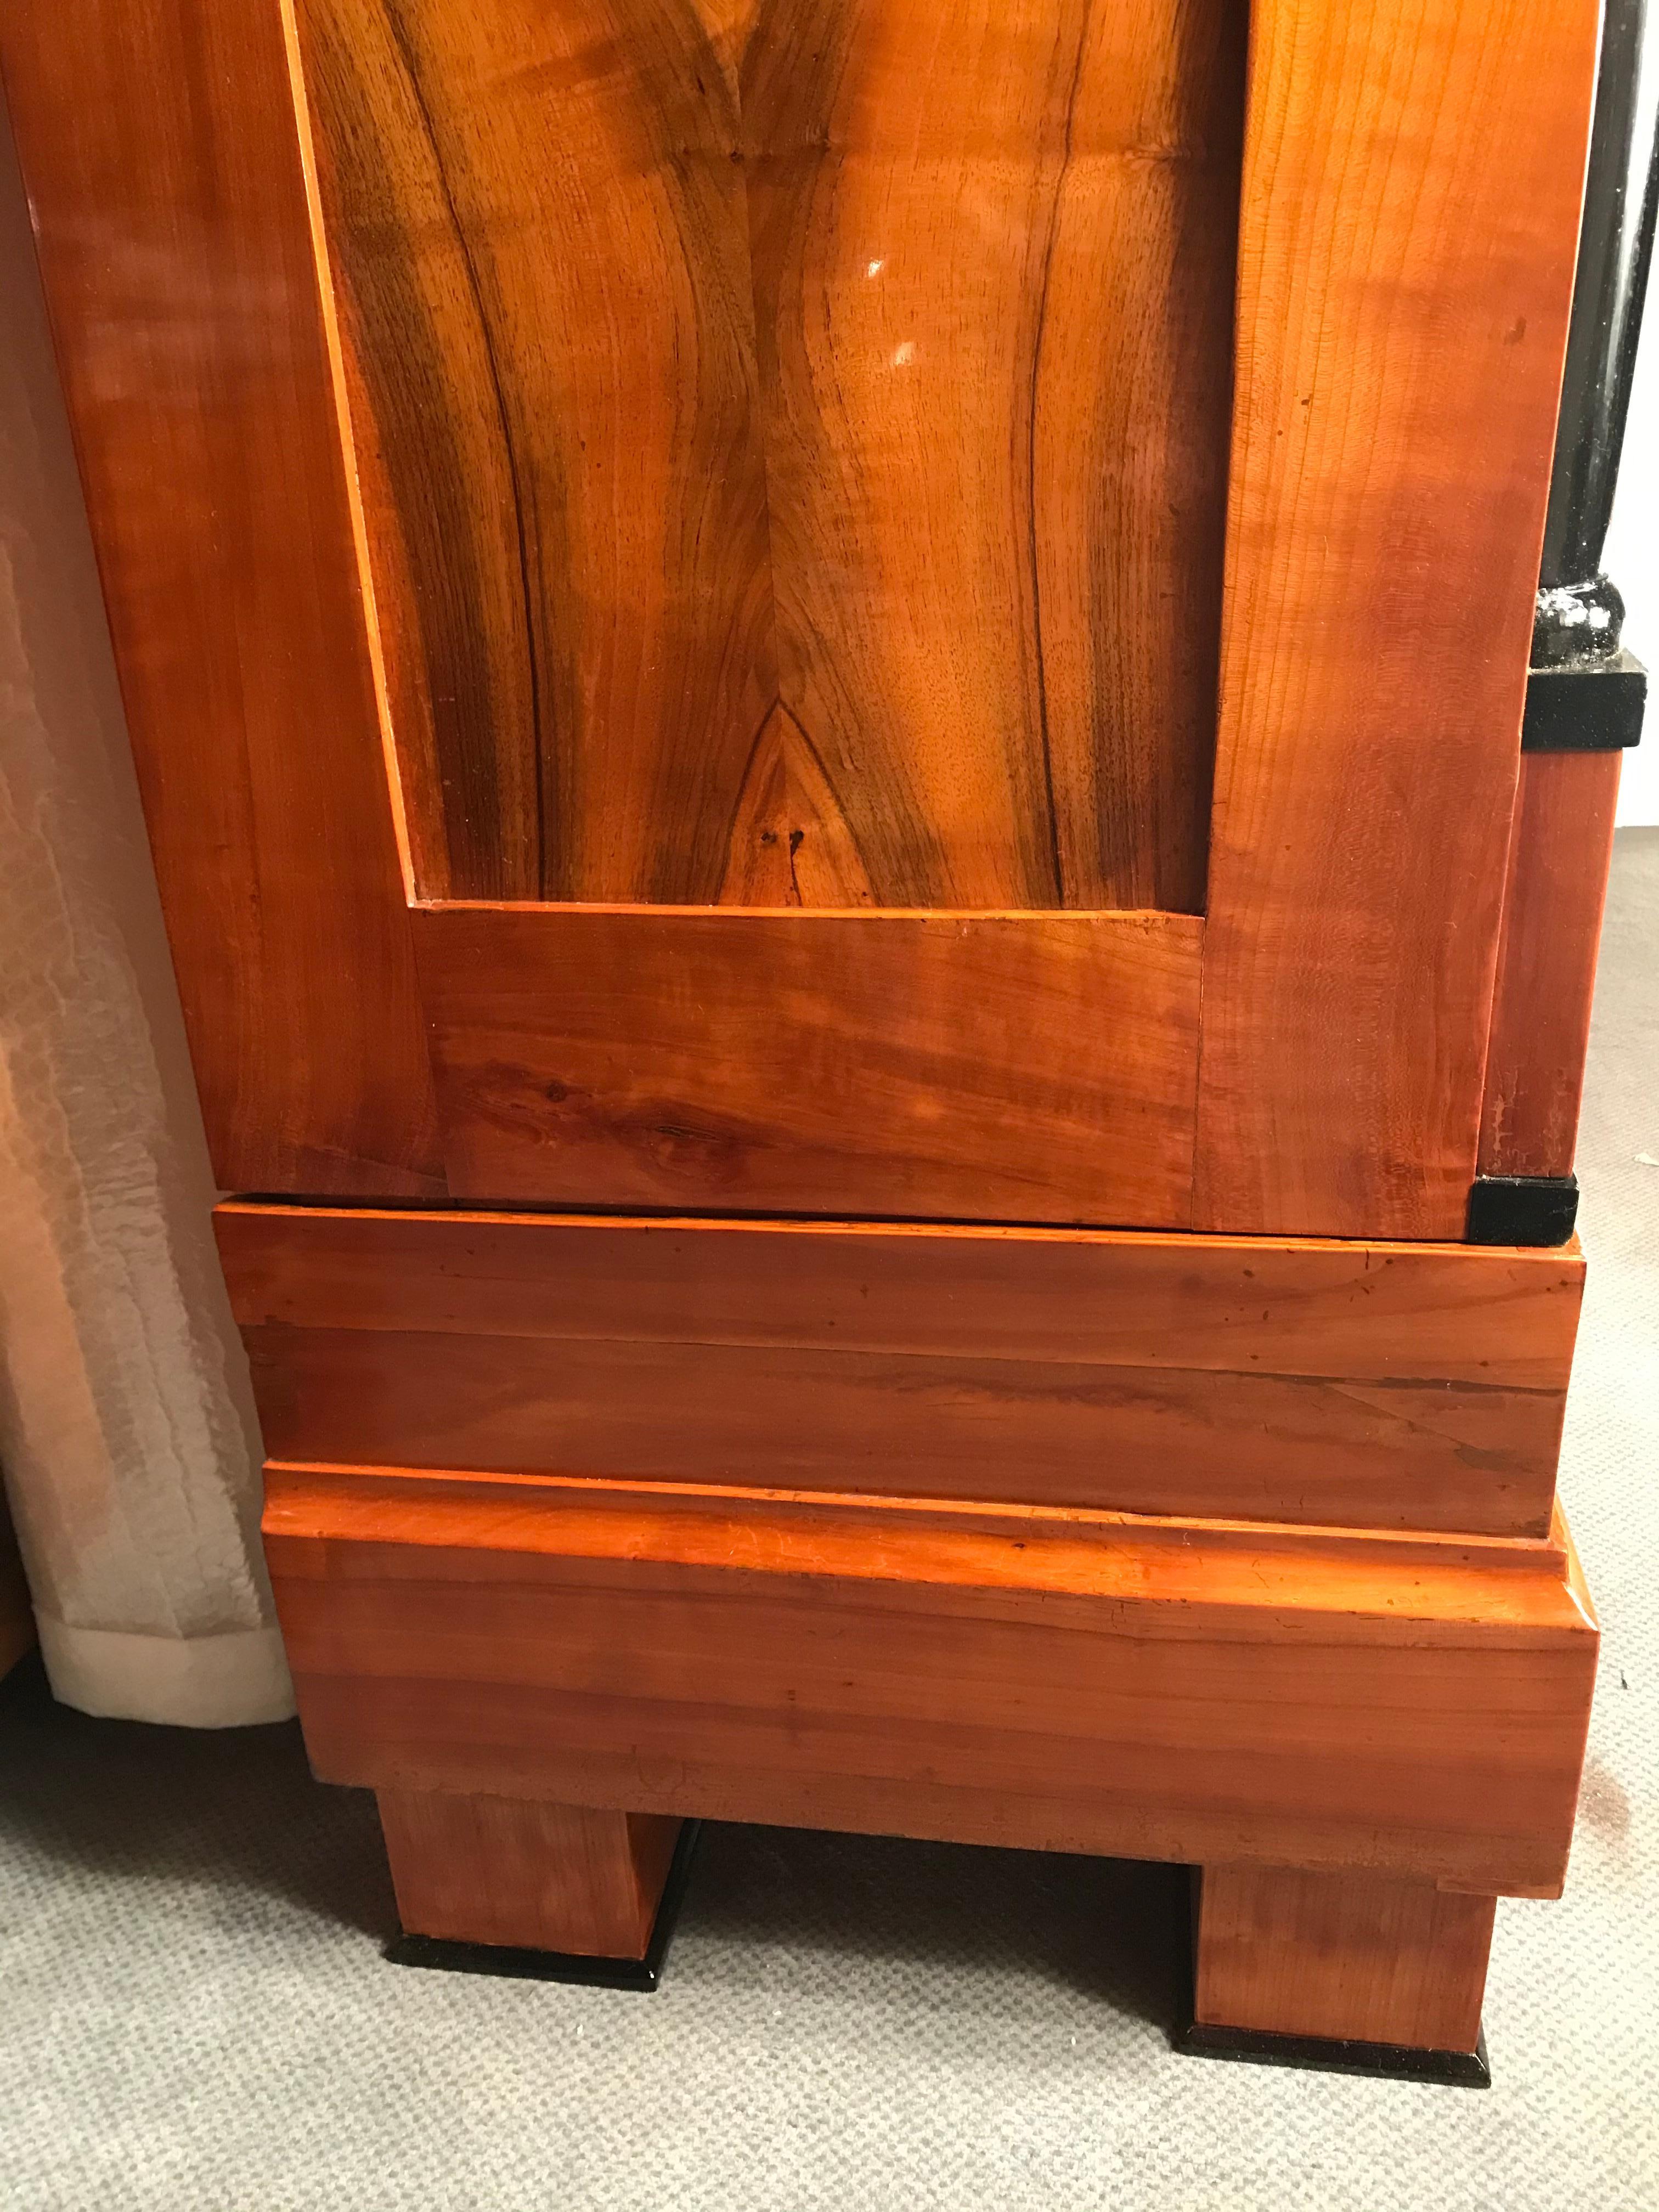 Biedermeier Armoire or Wardrobe, South Germany, 1820, Walnut and Cherry Veneer In Good Condition For Sale In Belmont, MA